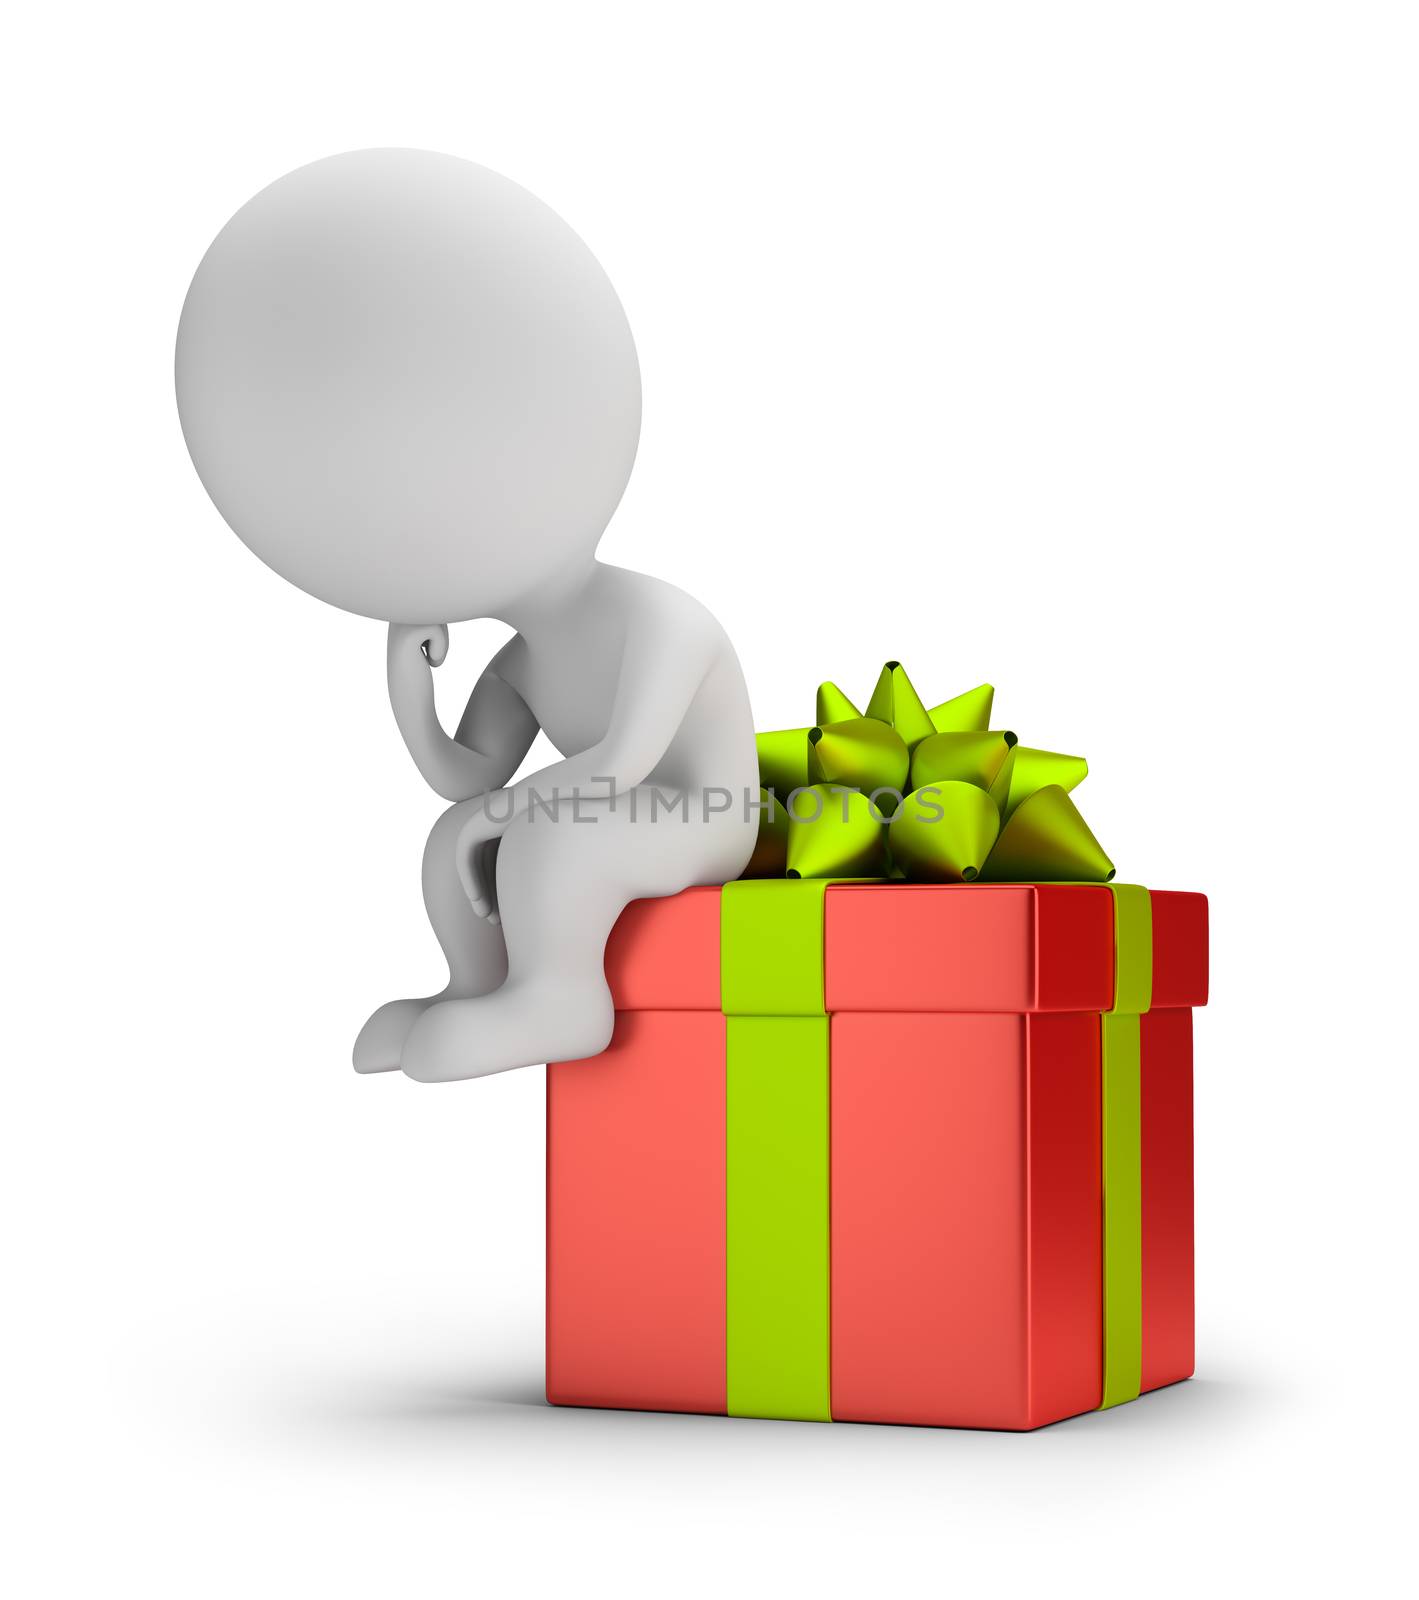 3d small person sitting on the gift in a pensive pose. 3d image. White background.